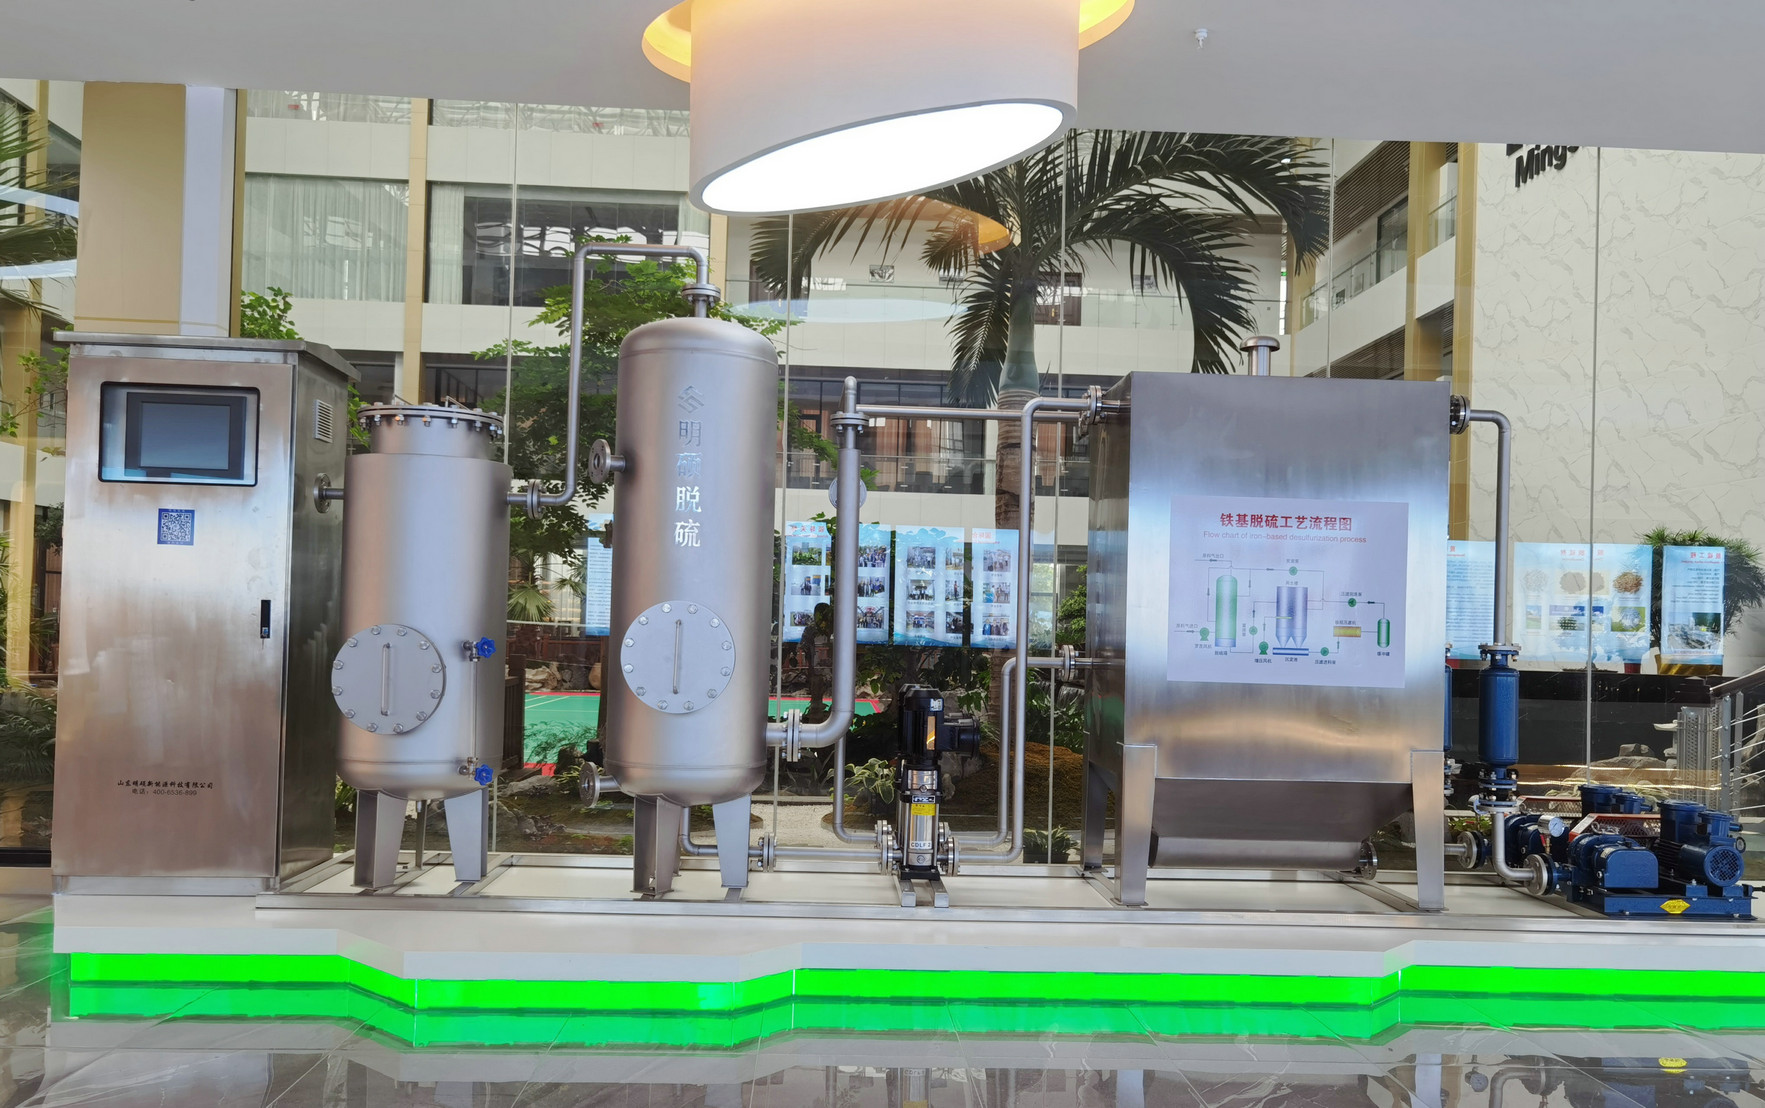 Chelated Iron-based Desulfurization System Model in the Showroom